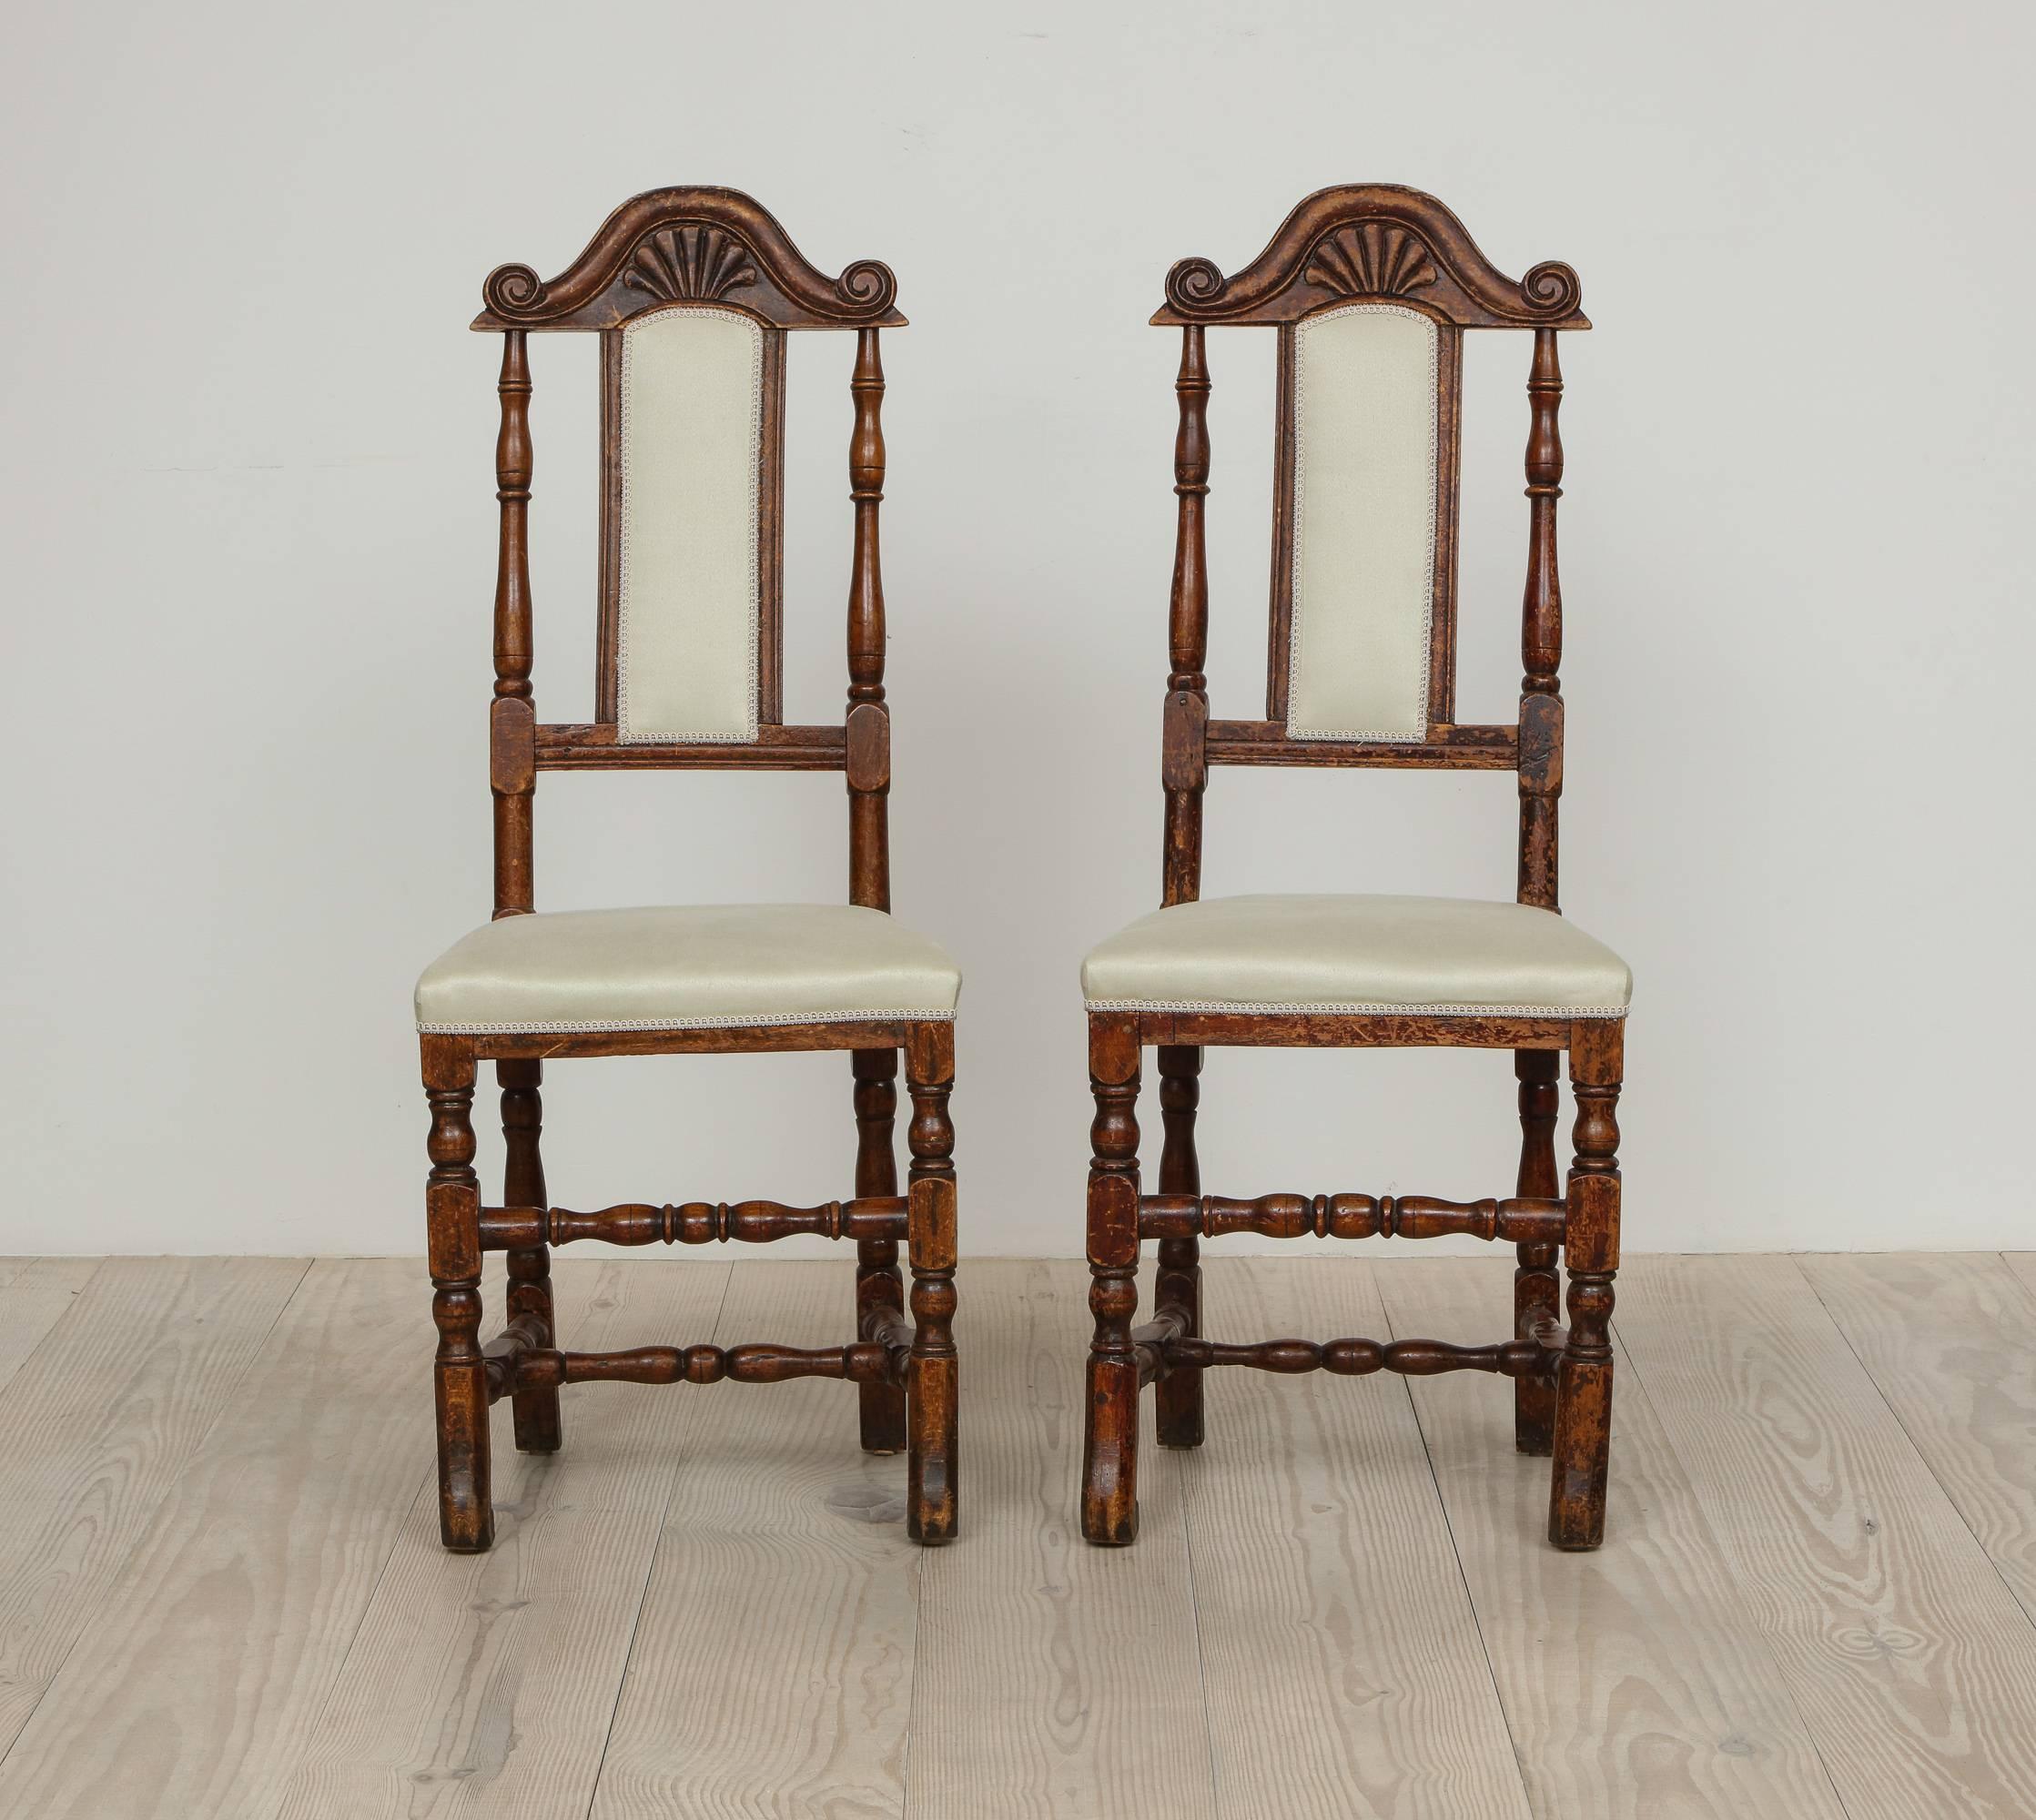 A pair of late Baroque Swedish chairs, origin: Sweden, circa 1750 -1760, reupholstered in linen sateen fabric from Rogers & Goffigon, the wood stained to resemble walnut.  

The form of these chairs, including their narrow back splat surmounted by a